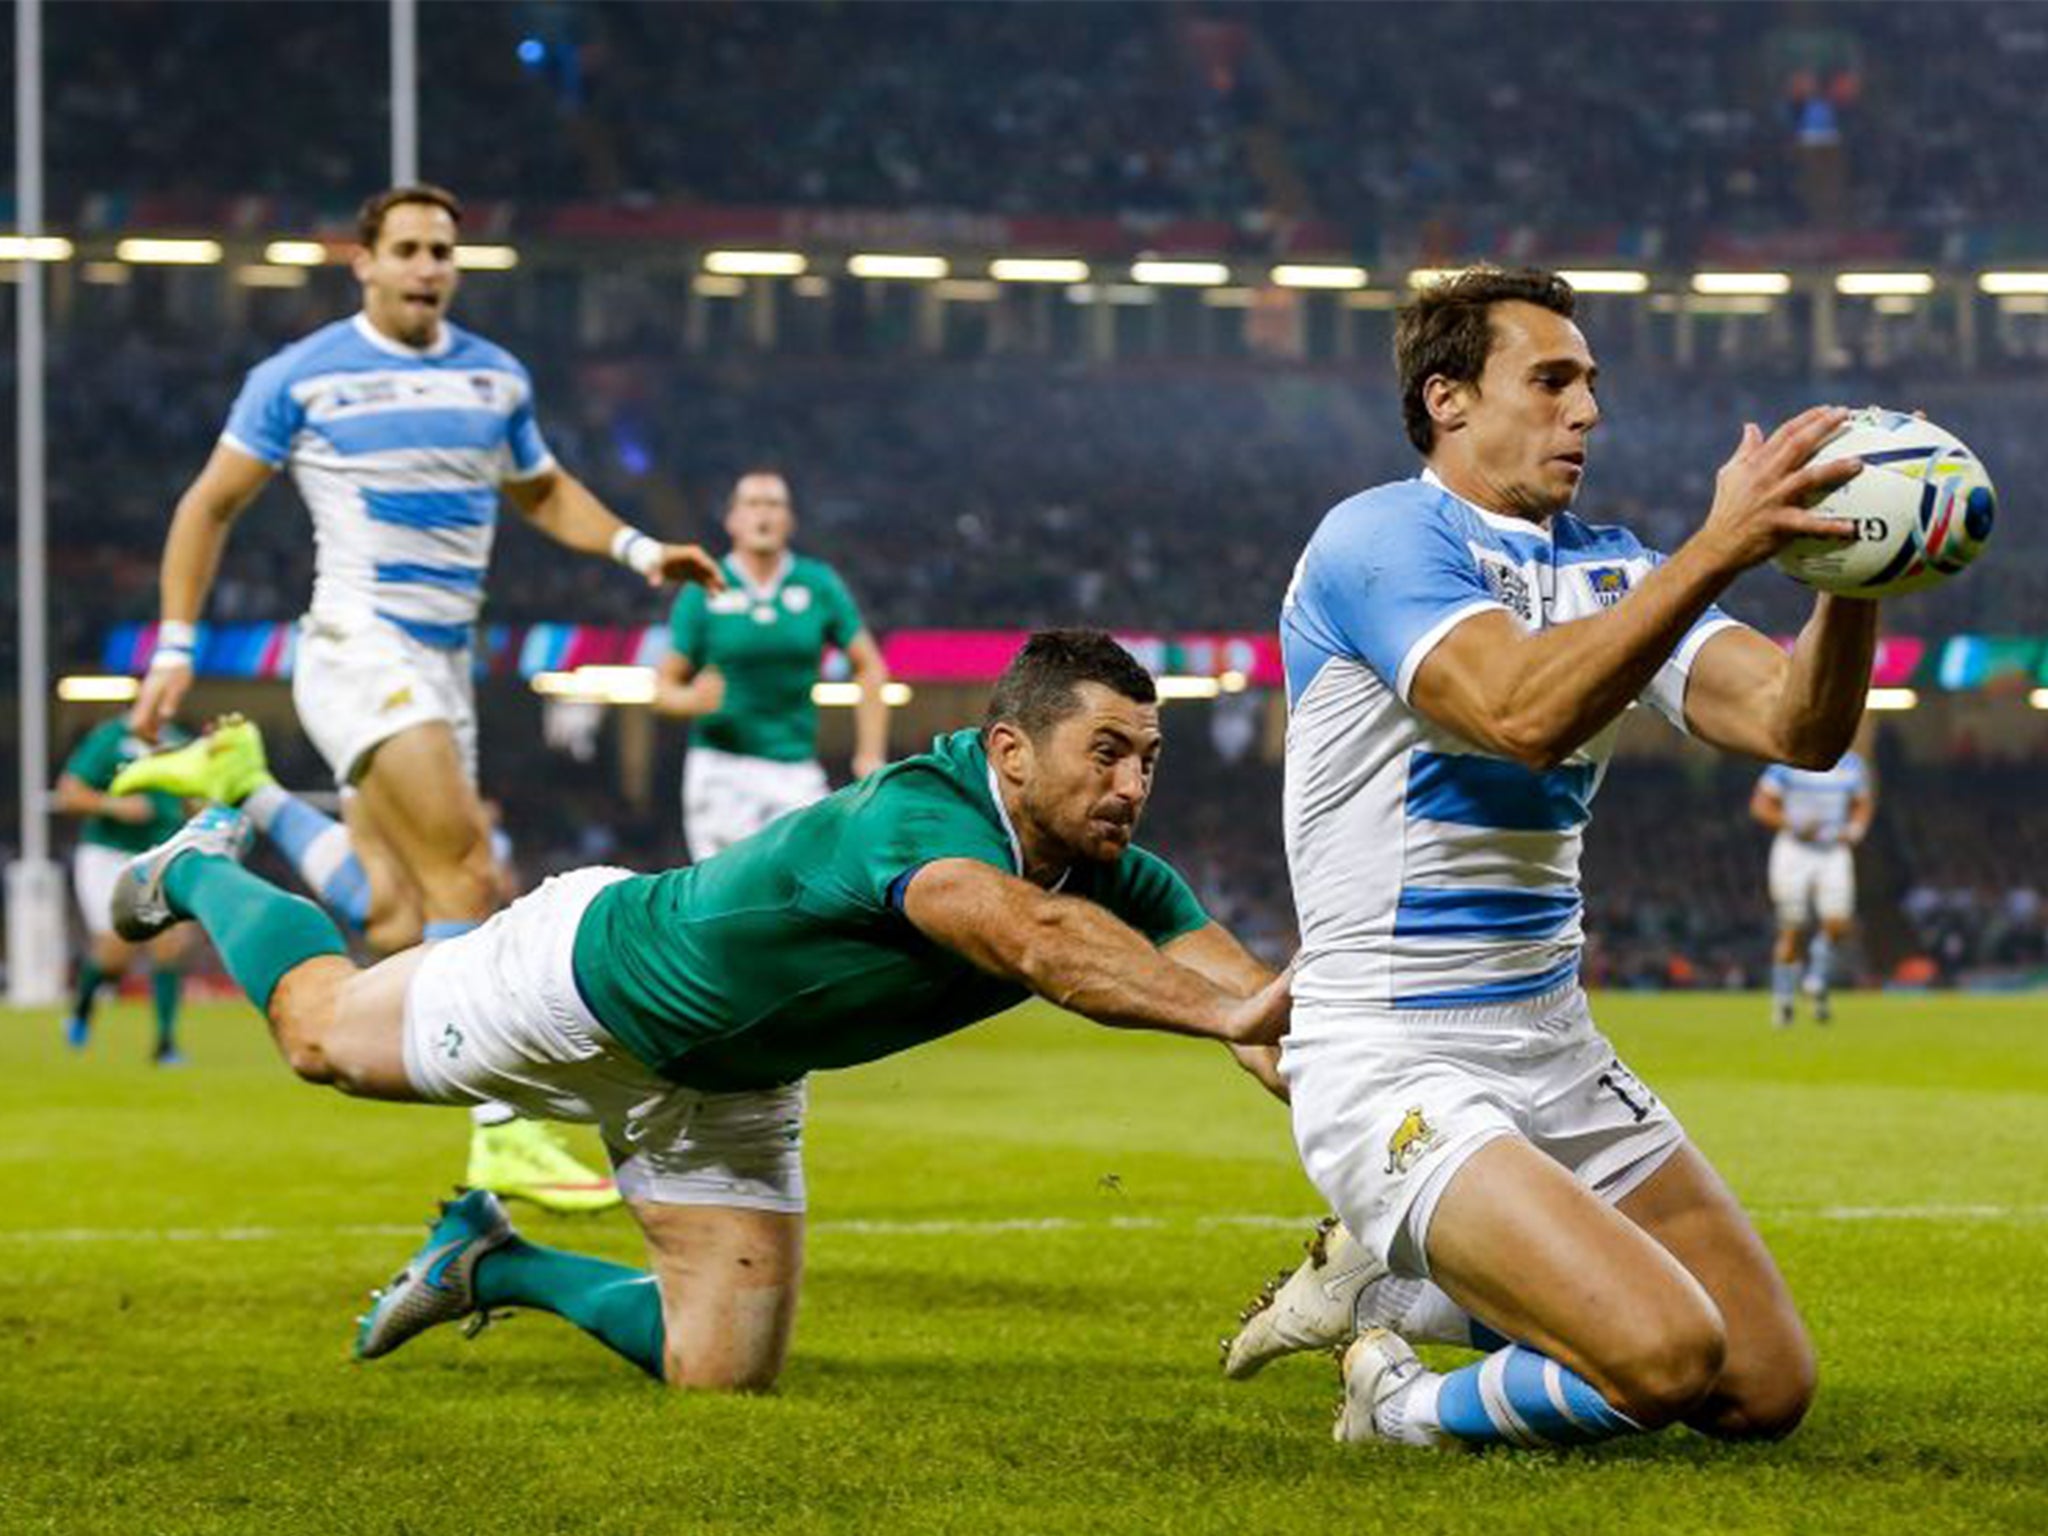 Argentina Winger Juan Imhoff gathers to score the second try of the game as Ireland Full Back Rob Kearney tackles